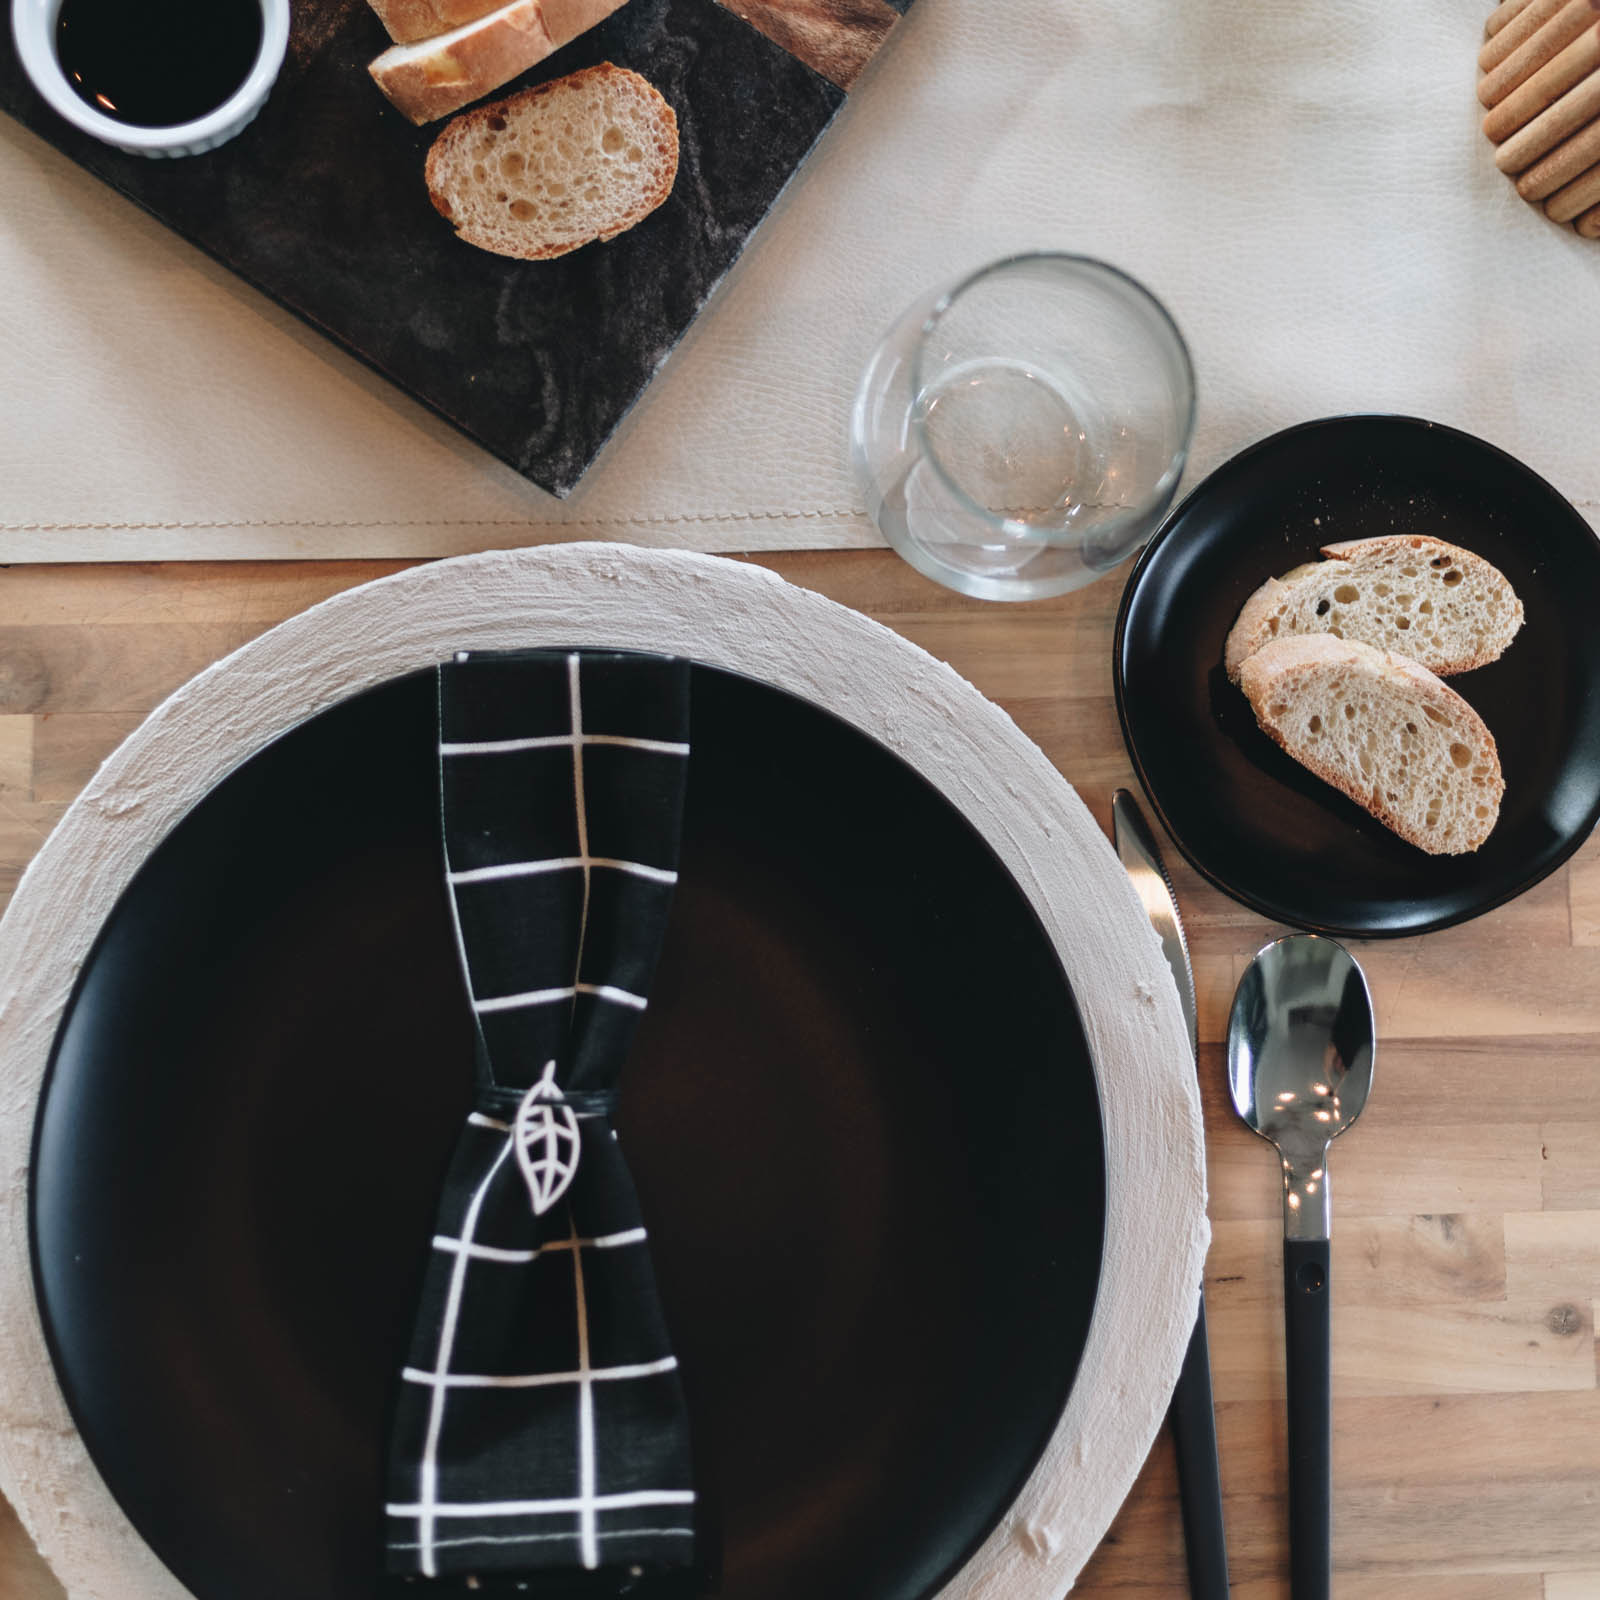 baking soda and paint chargers in place setting with black paint and black and white napkin